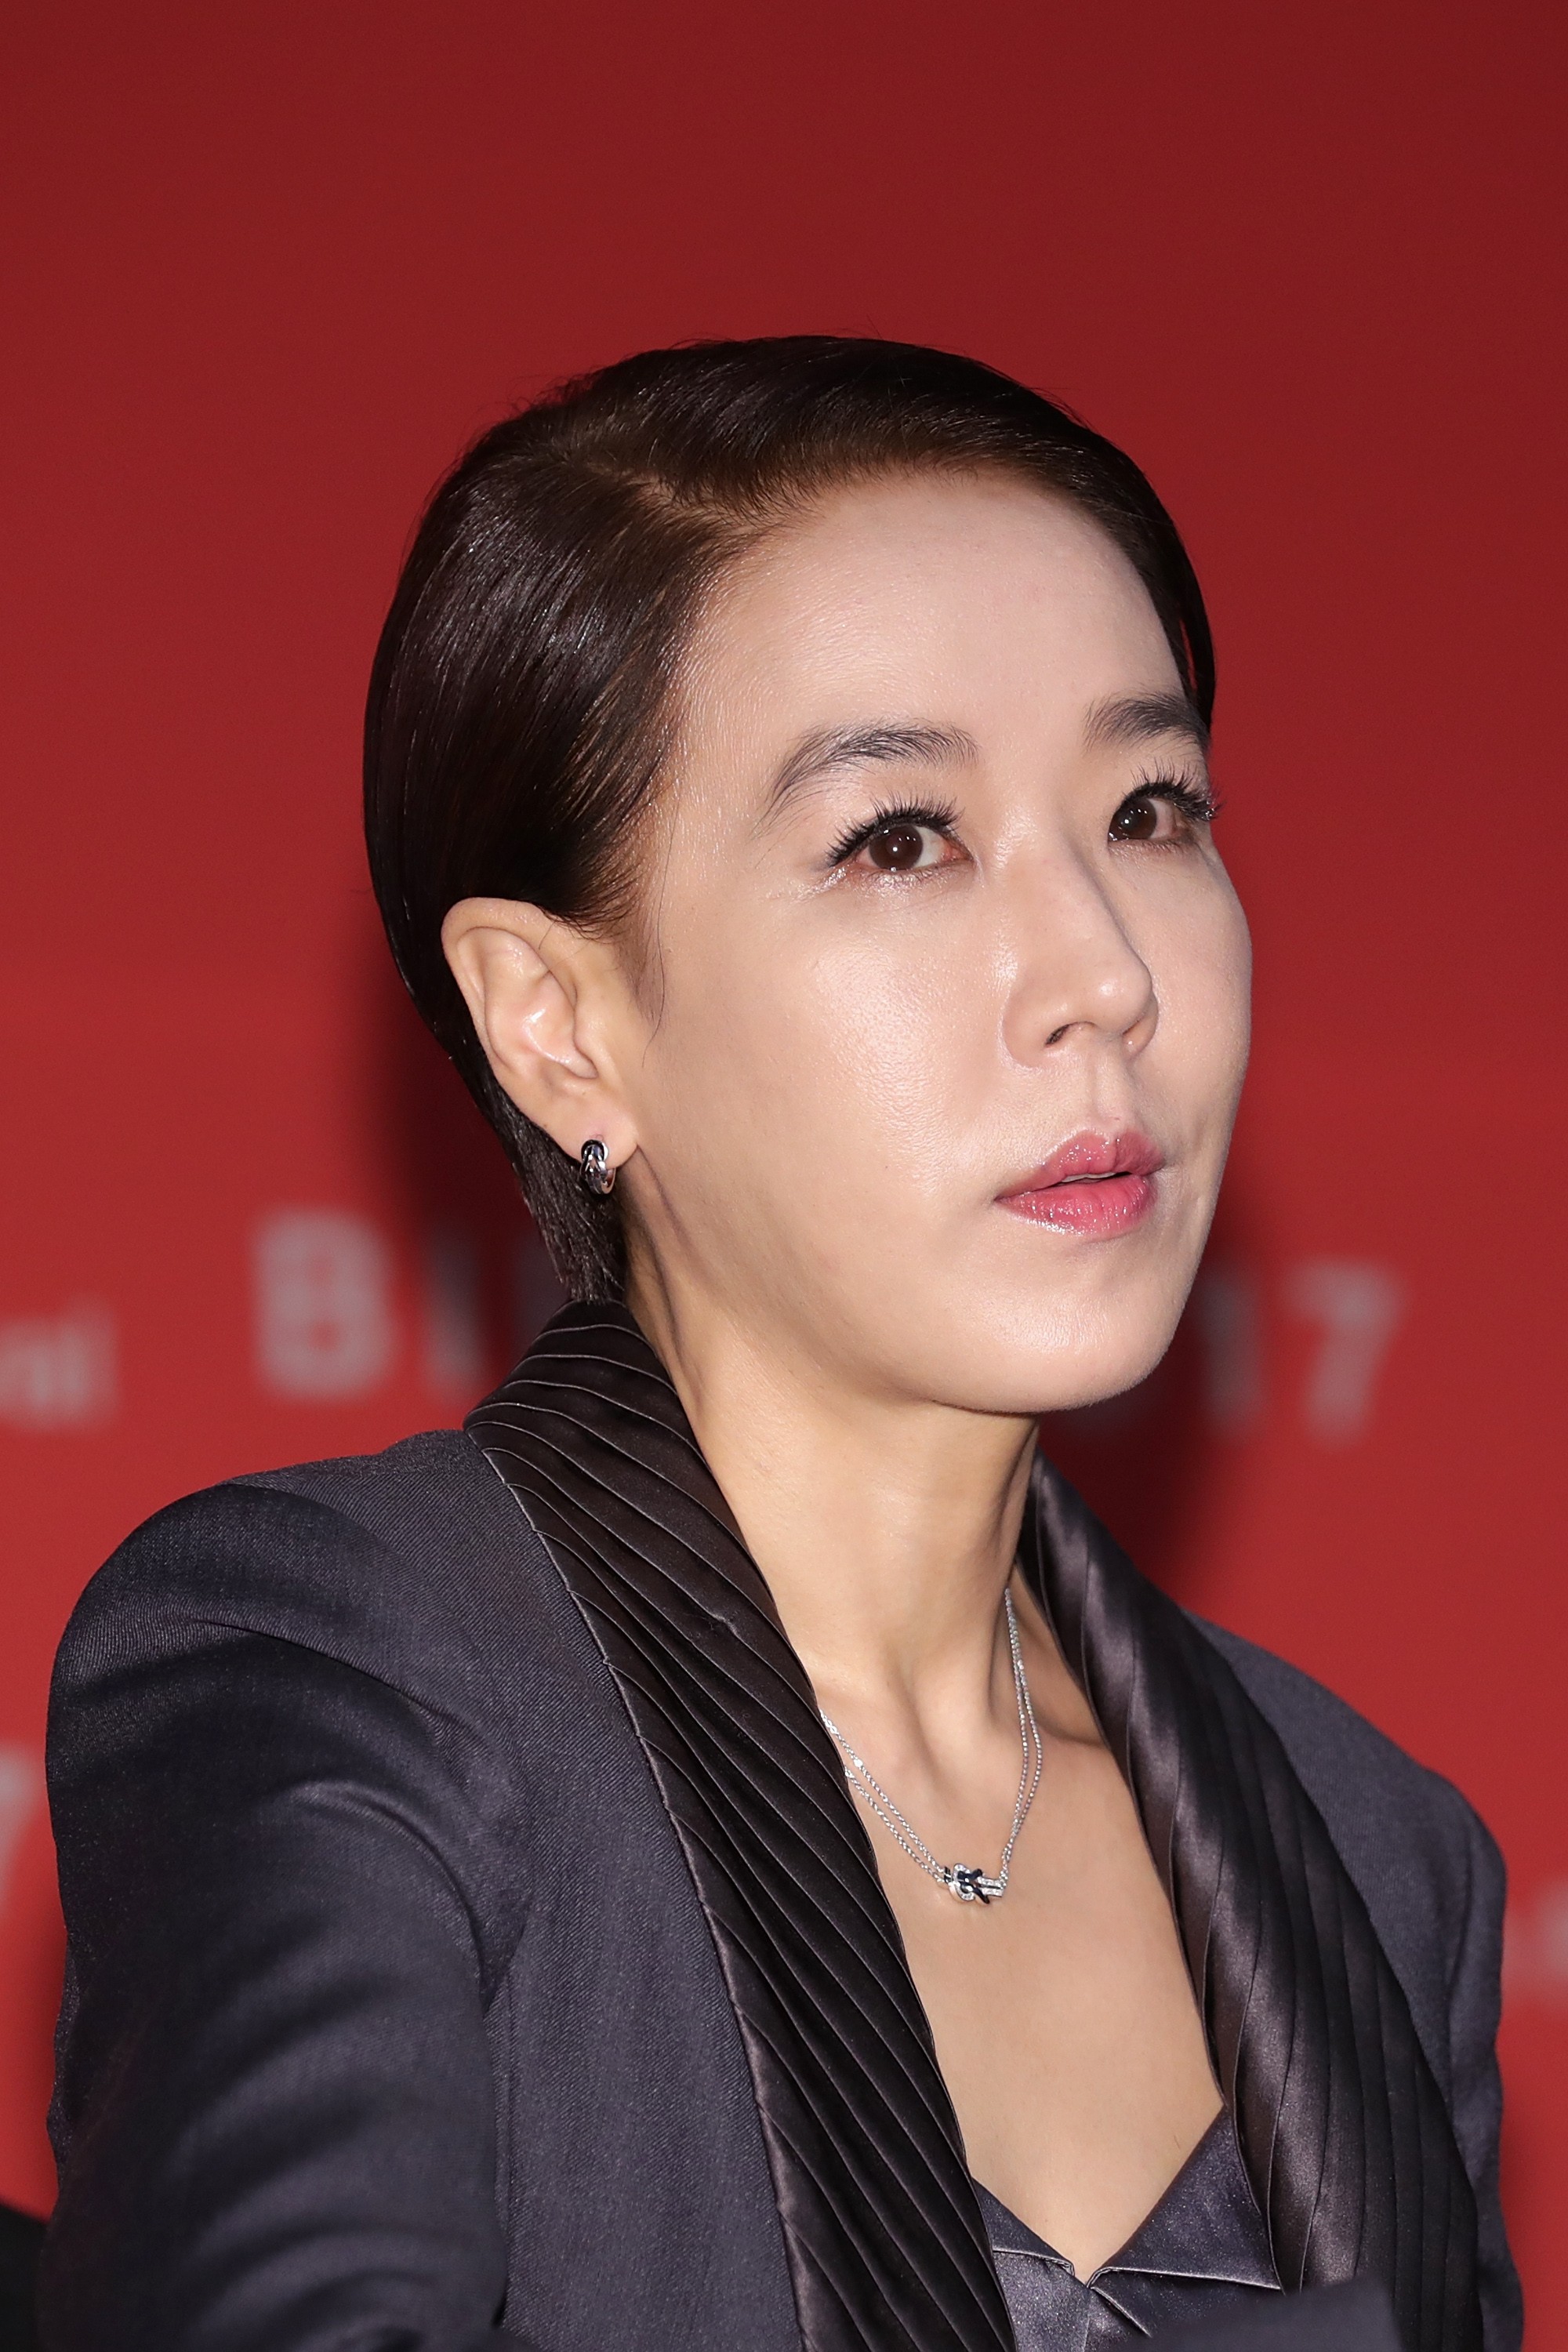 BUSAN, SOUTH KOREA - OCTOBER 12:  Festival director Kang Soo-Youn attends a photocall for 'Glass Garden' the opening film of the 22nd Busan International Film Festival on October 12, 2017 in Busan, South Korea.  (Photo by Han Myung-Gu/WireImage) (Foto: WireImage)